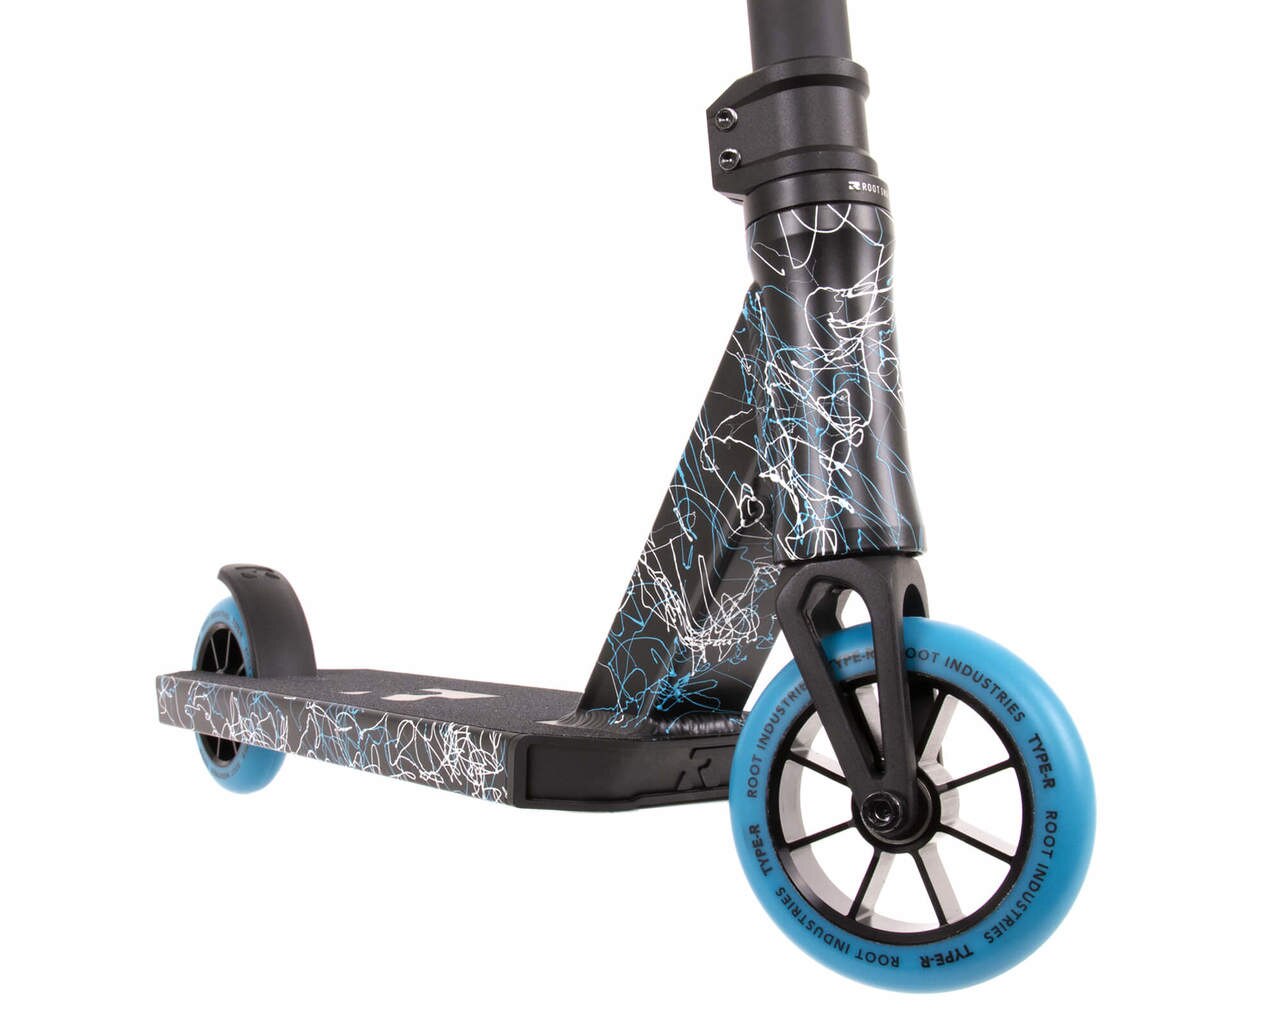 Root Industries - Type R Mini Complete Scooter